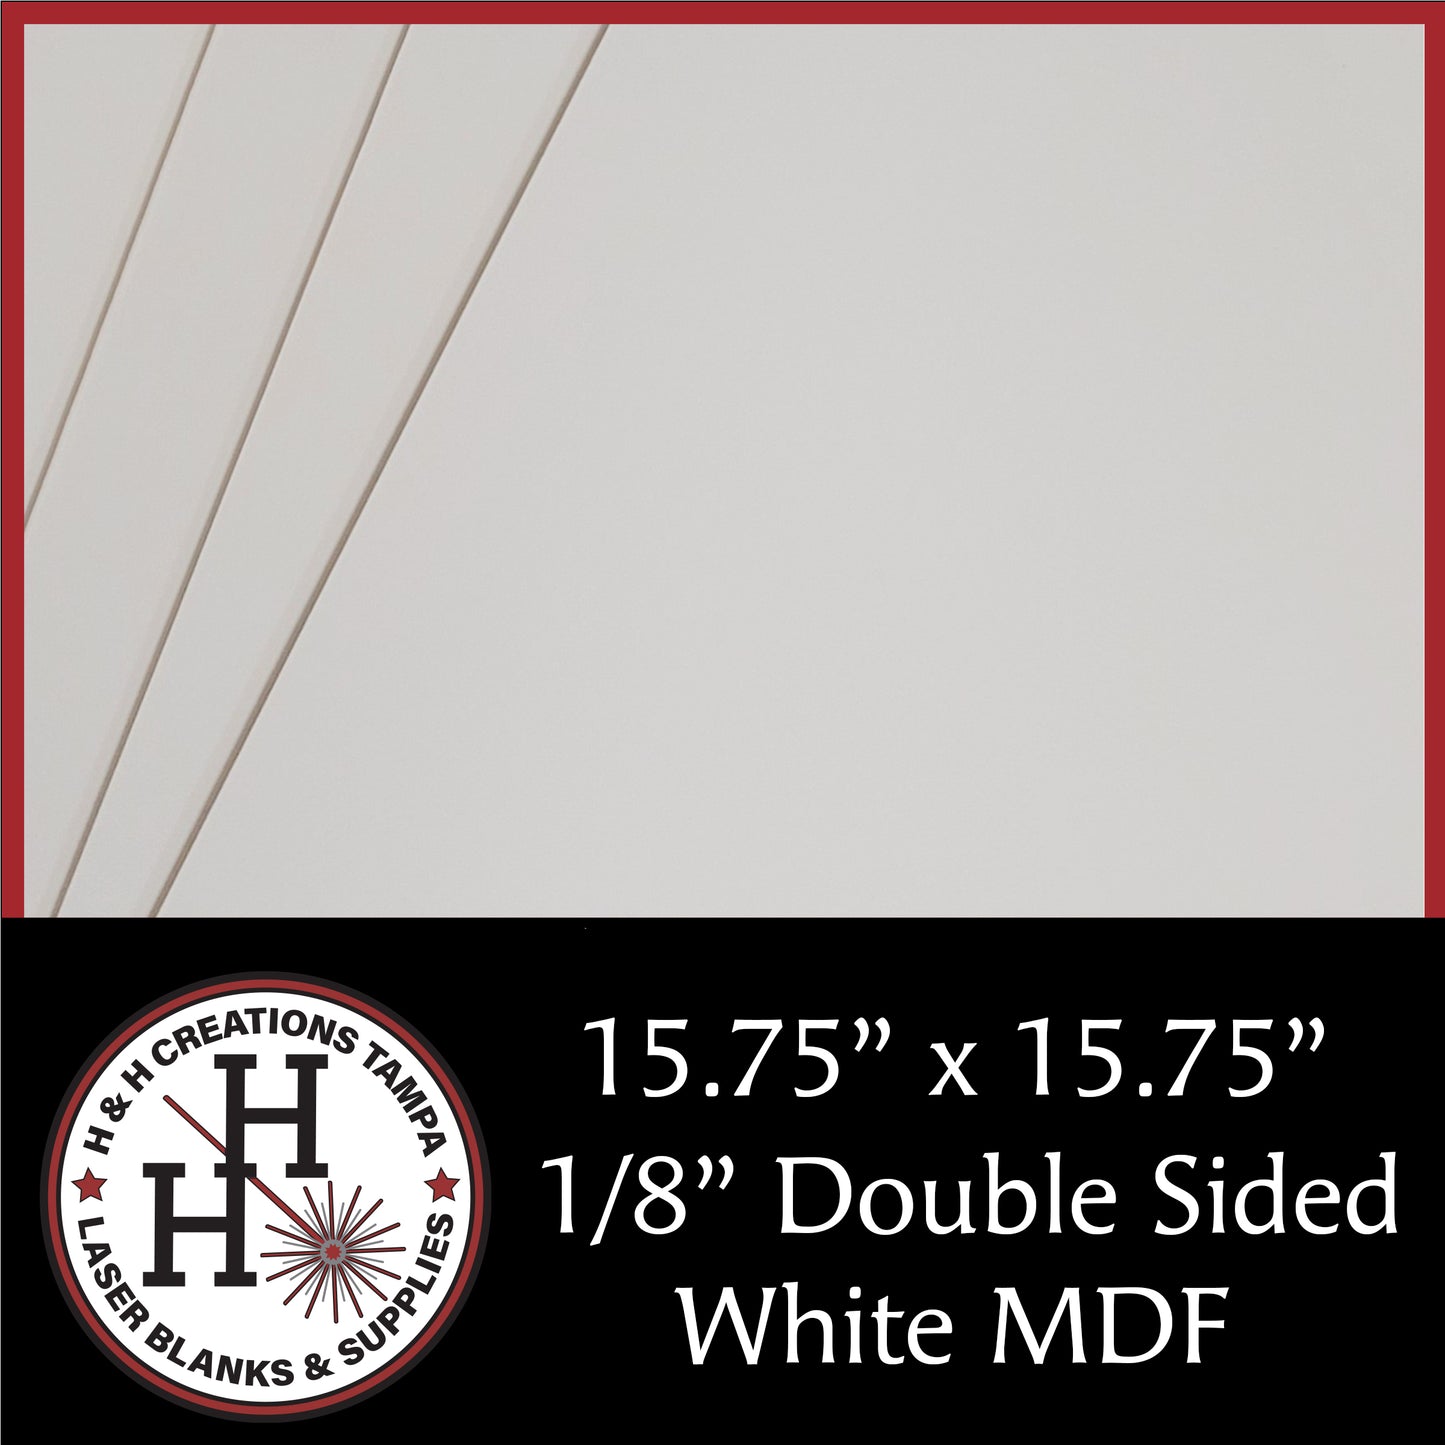 LOCAL PICK UP ONLY - 1/8" Premium Double-Sided White MDF/HDF Draft Board - 15.75" x 15.75"